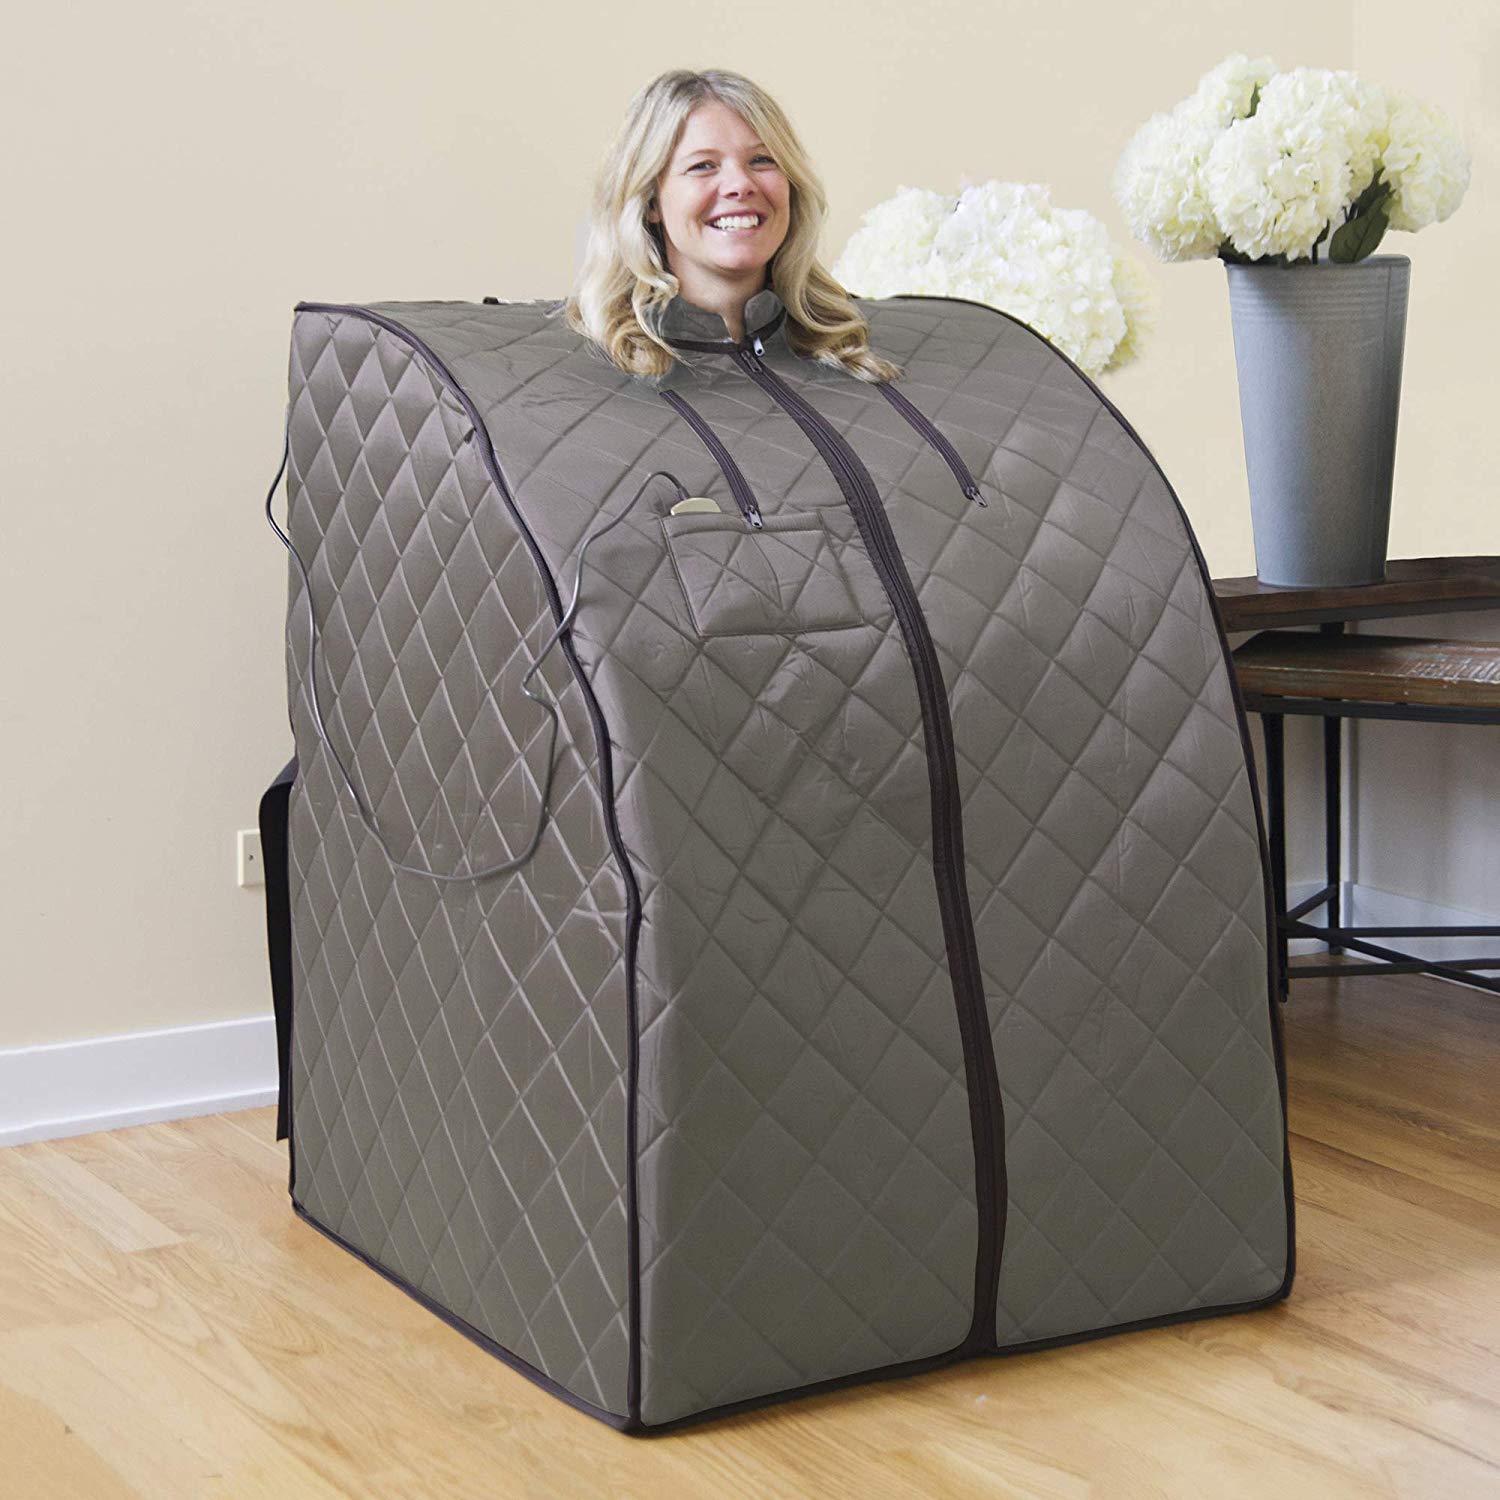 Review of Radiant Saunas Rejuvinator Portable Personal Sauna with FAR Infrared Carbon Panels